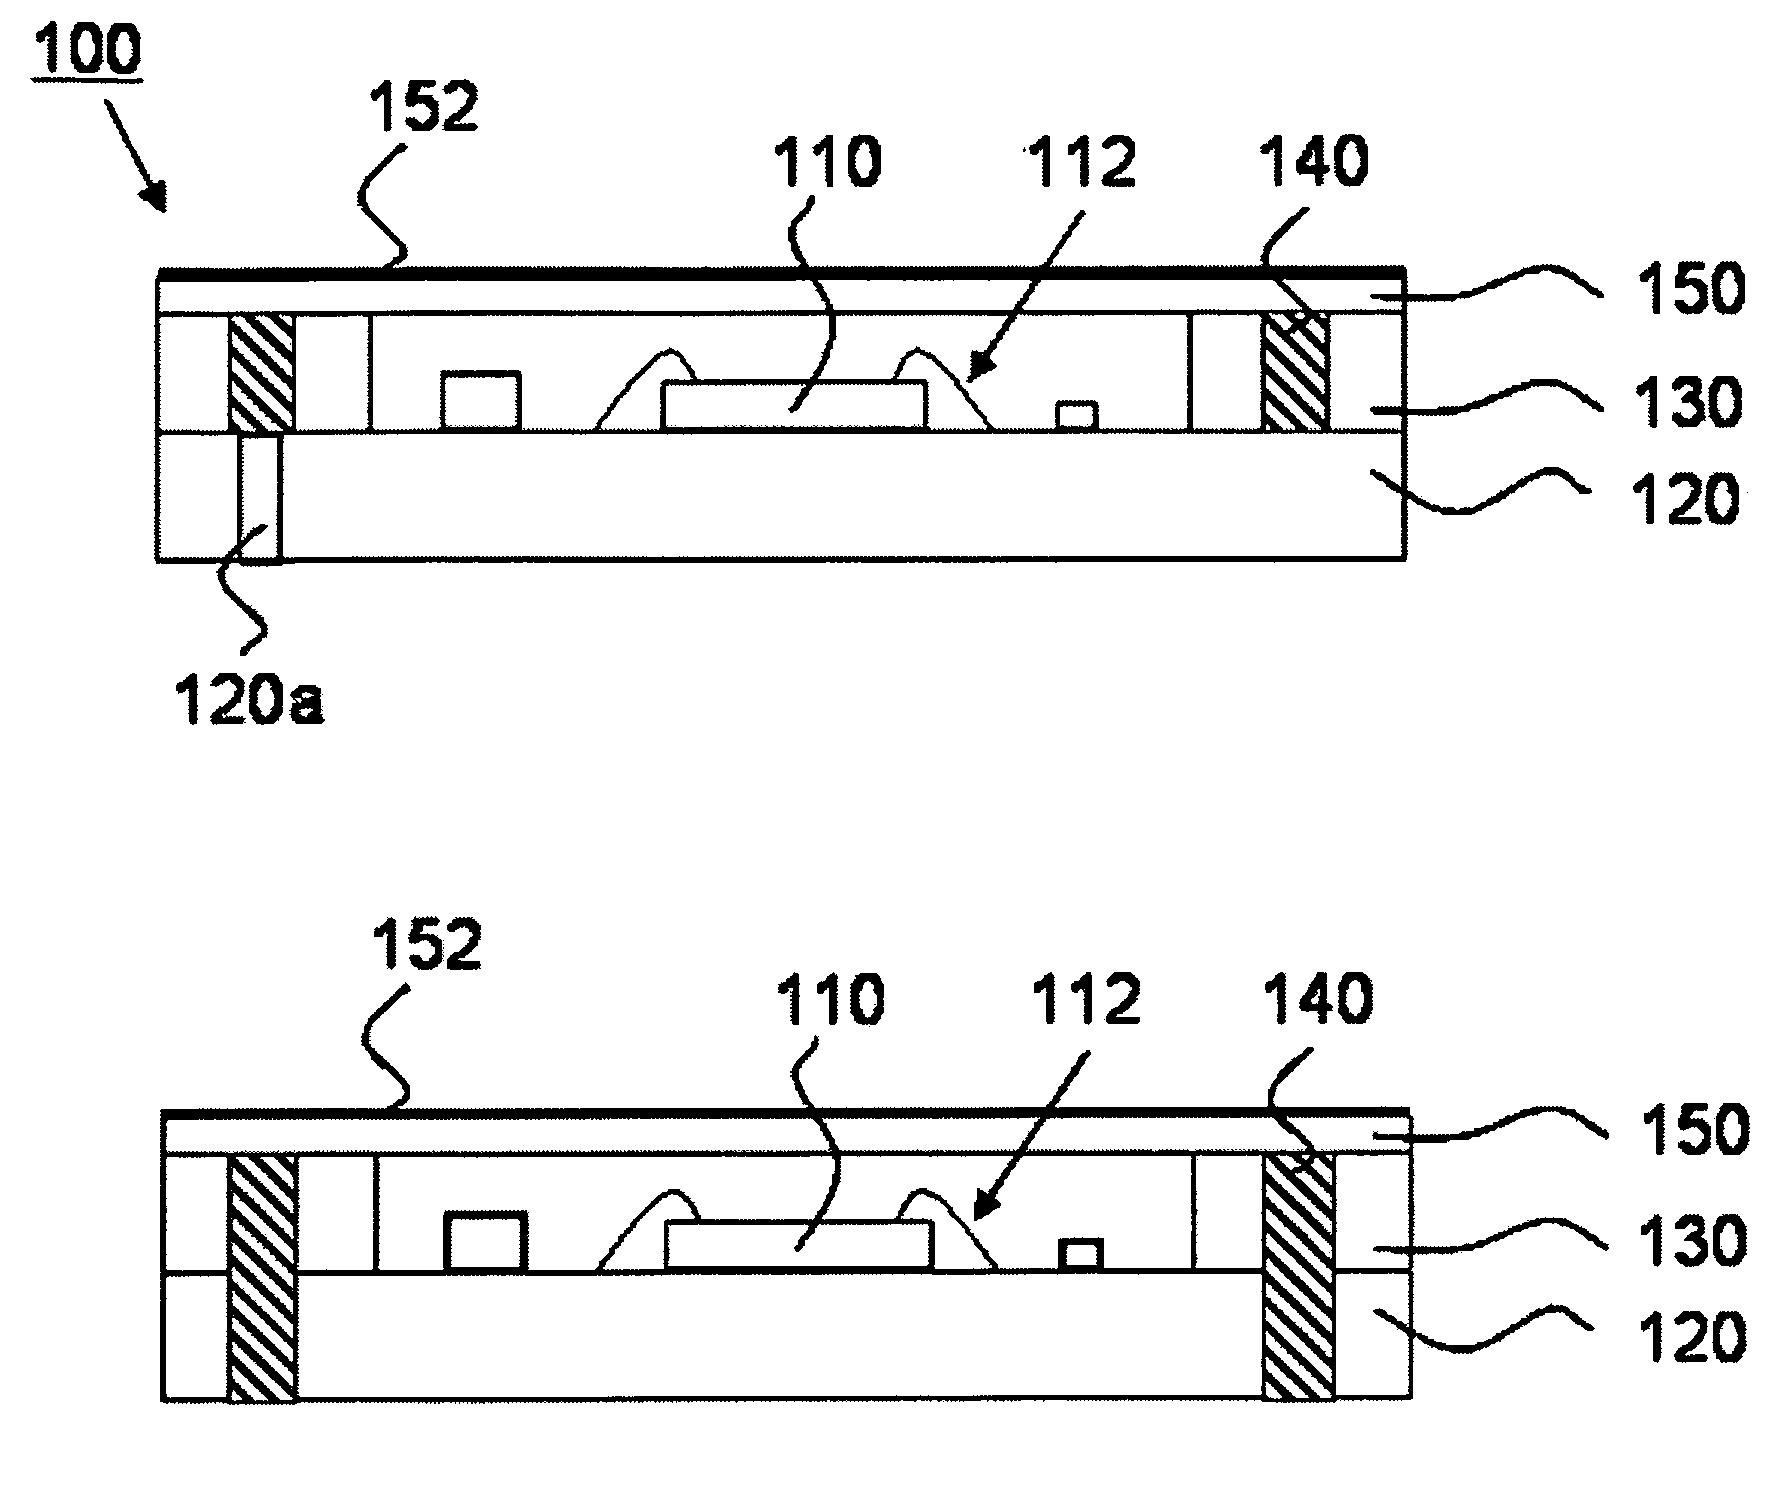 Semiconductor device package